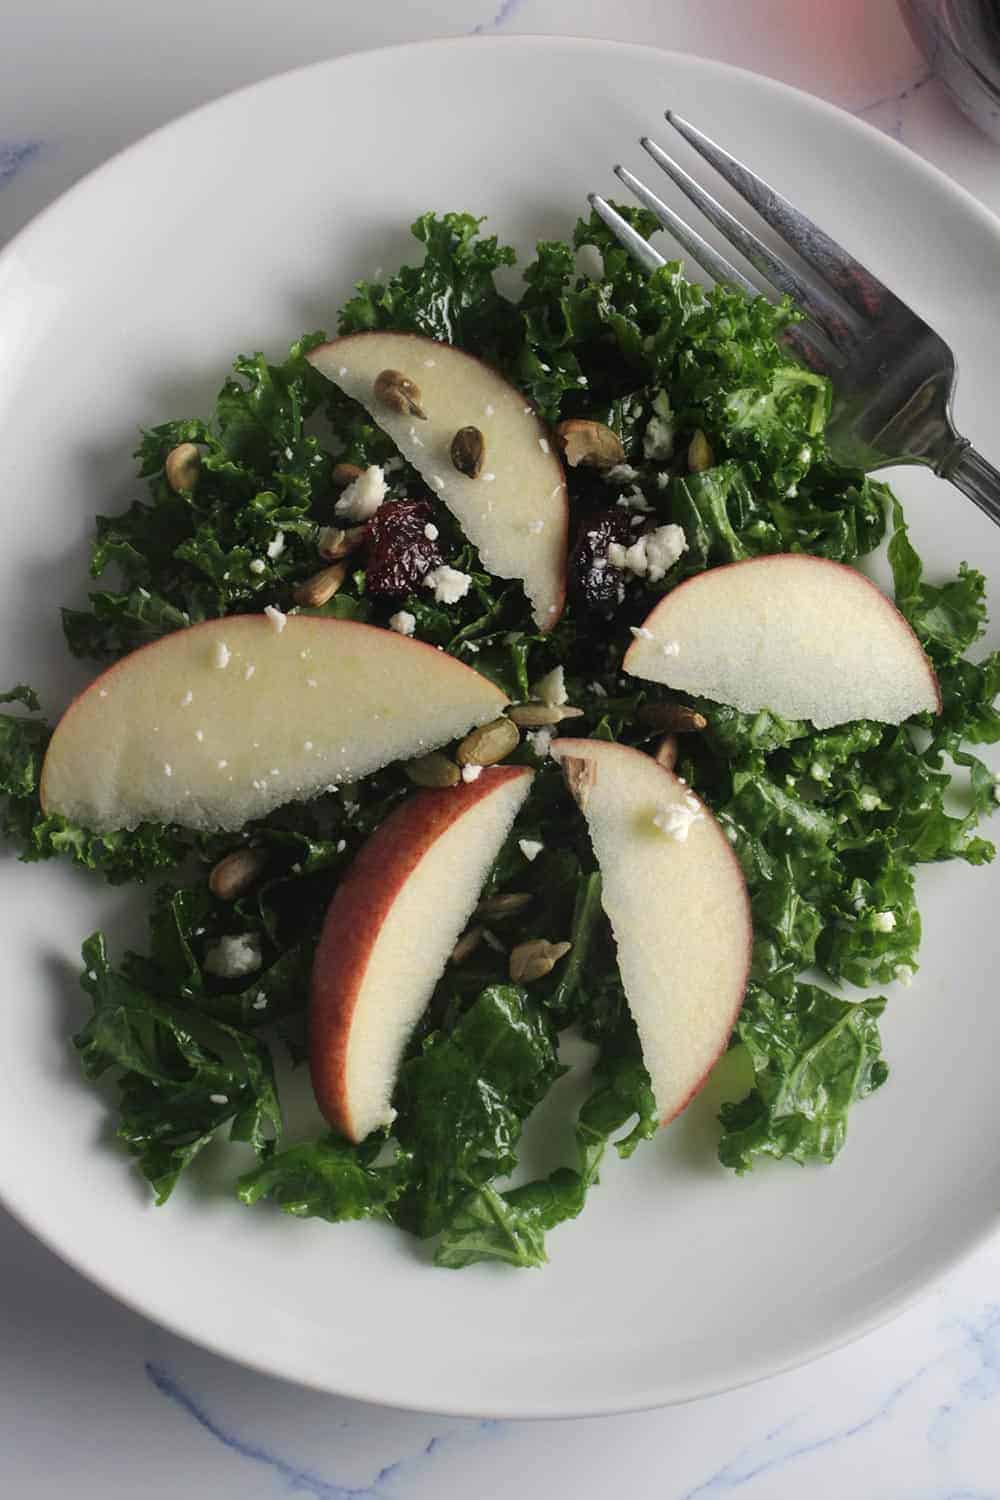 kale and apple salad plated.